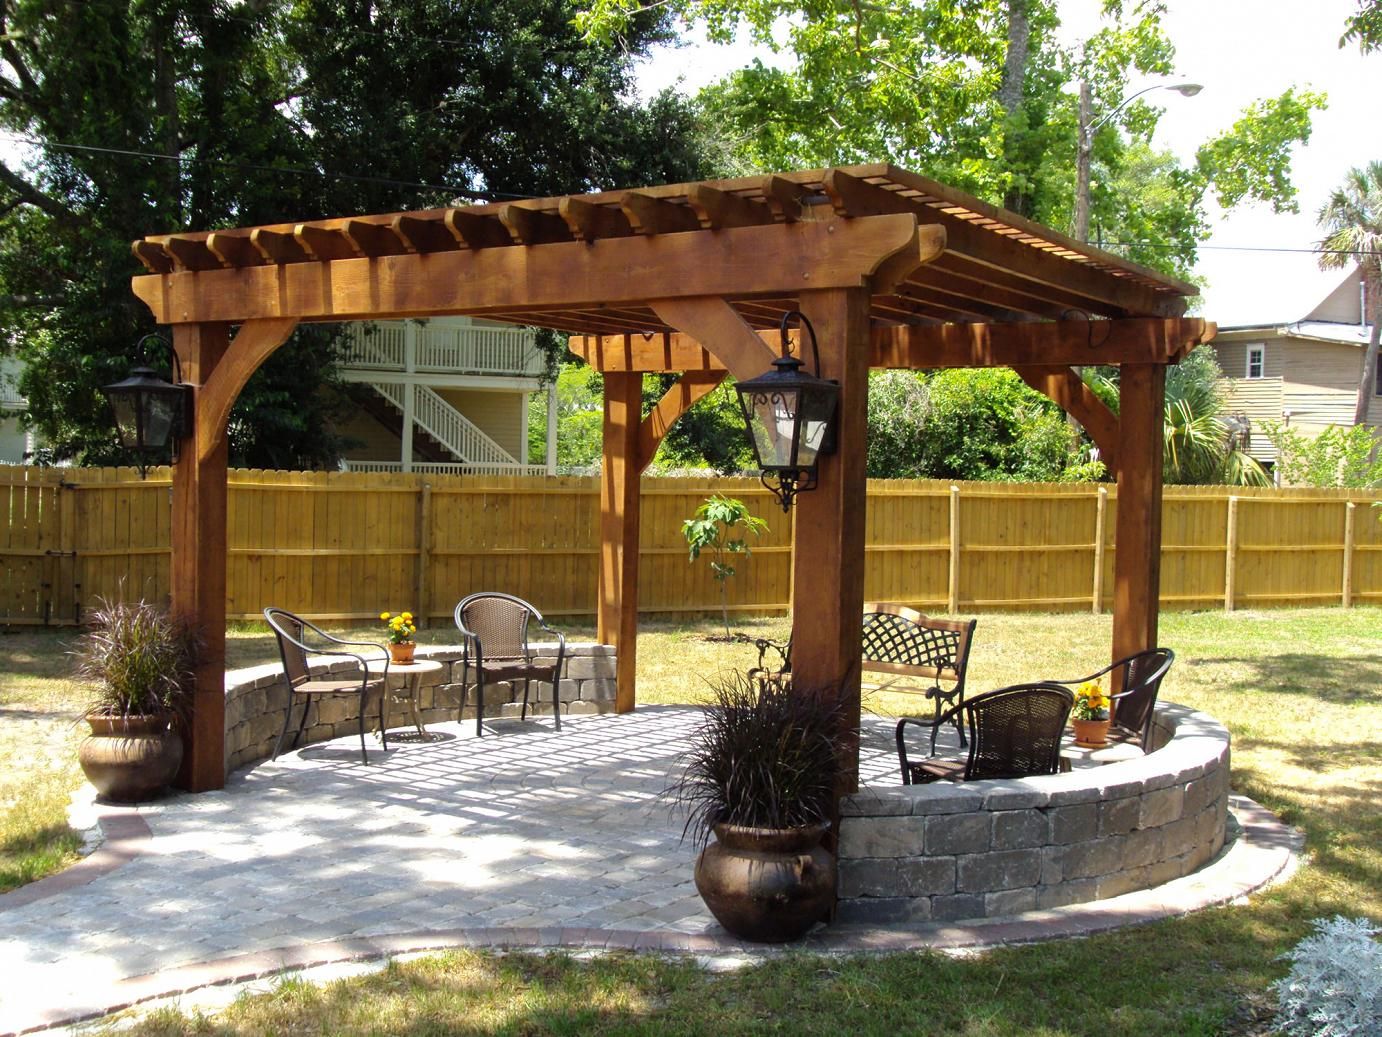 Outdoor Pergolas-Woodlands TX Landscape Designs & Outdoor Living Areas-We offer Landscape Design, Outdoor Patios & Pergolas, Outdoor Living Spaces, Stonescapes, Residential & Commercial Landscaping, Irrigation Installation & Repairs, Drainage Systems, Landscape Lighting, Outdoor Living Spaces, Tree Service, Lawn Service, and more.